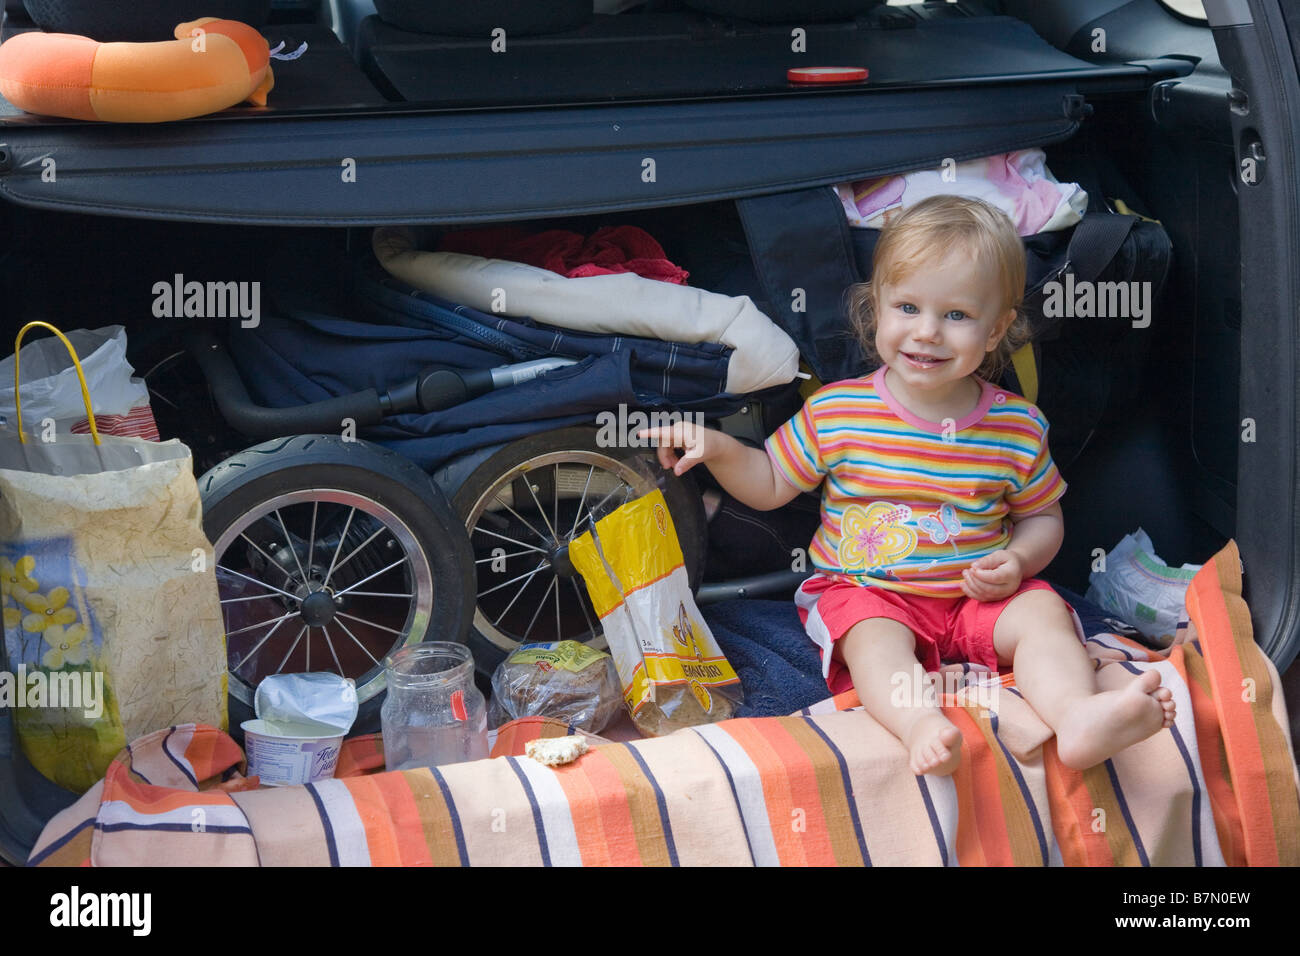 One Year Old Baby Sitting in Car Stock Photo